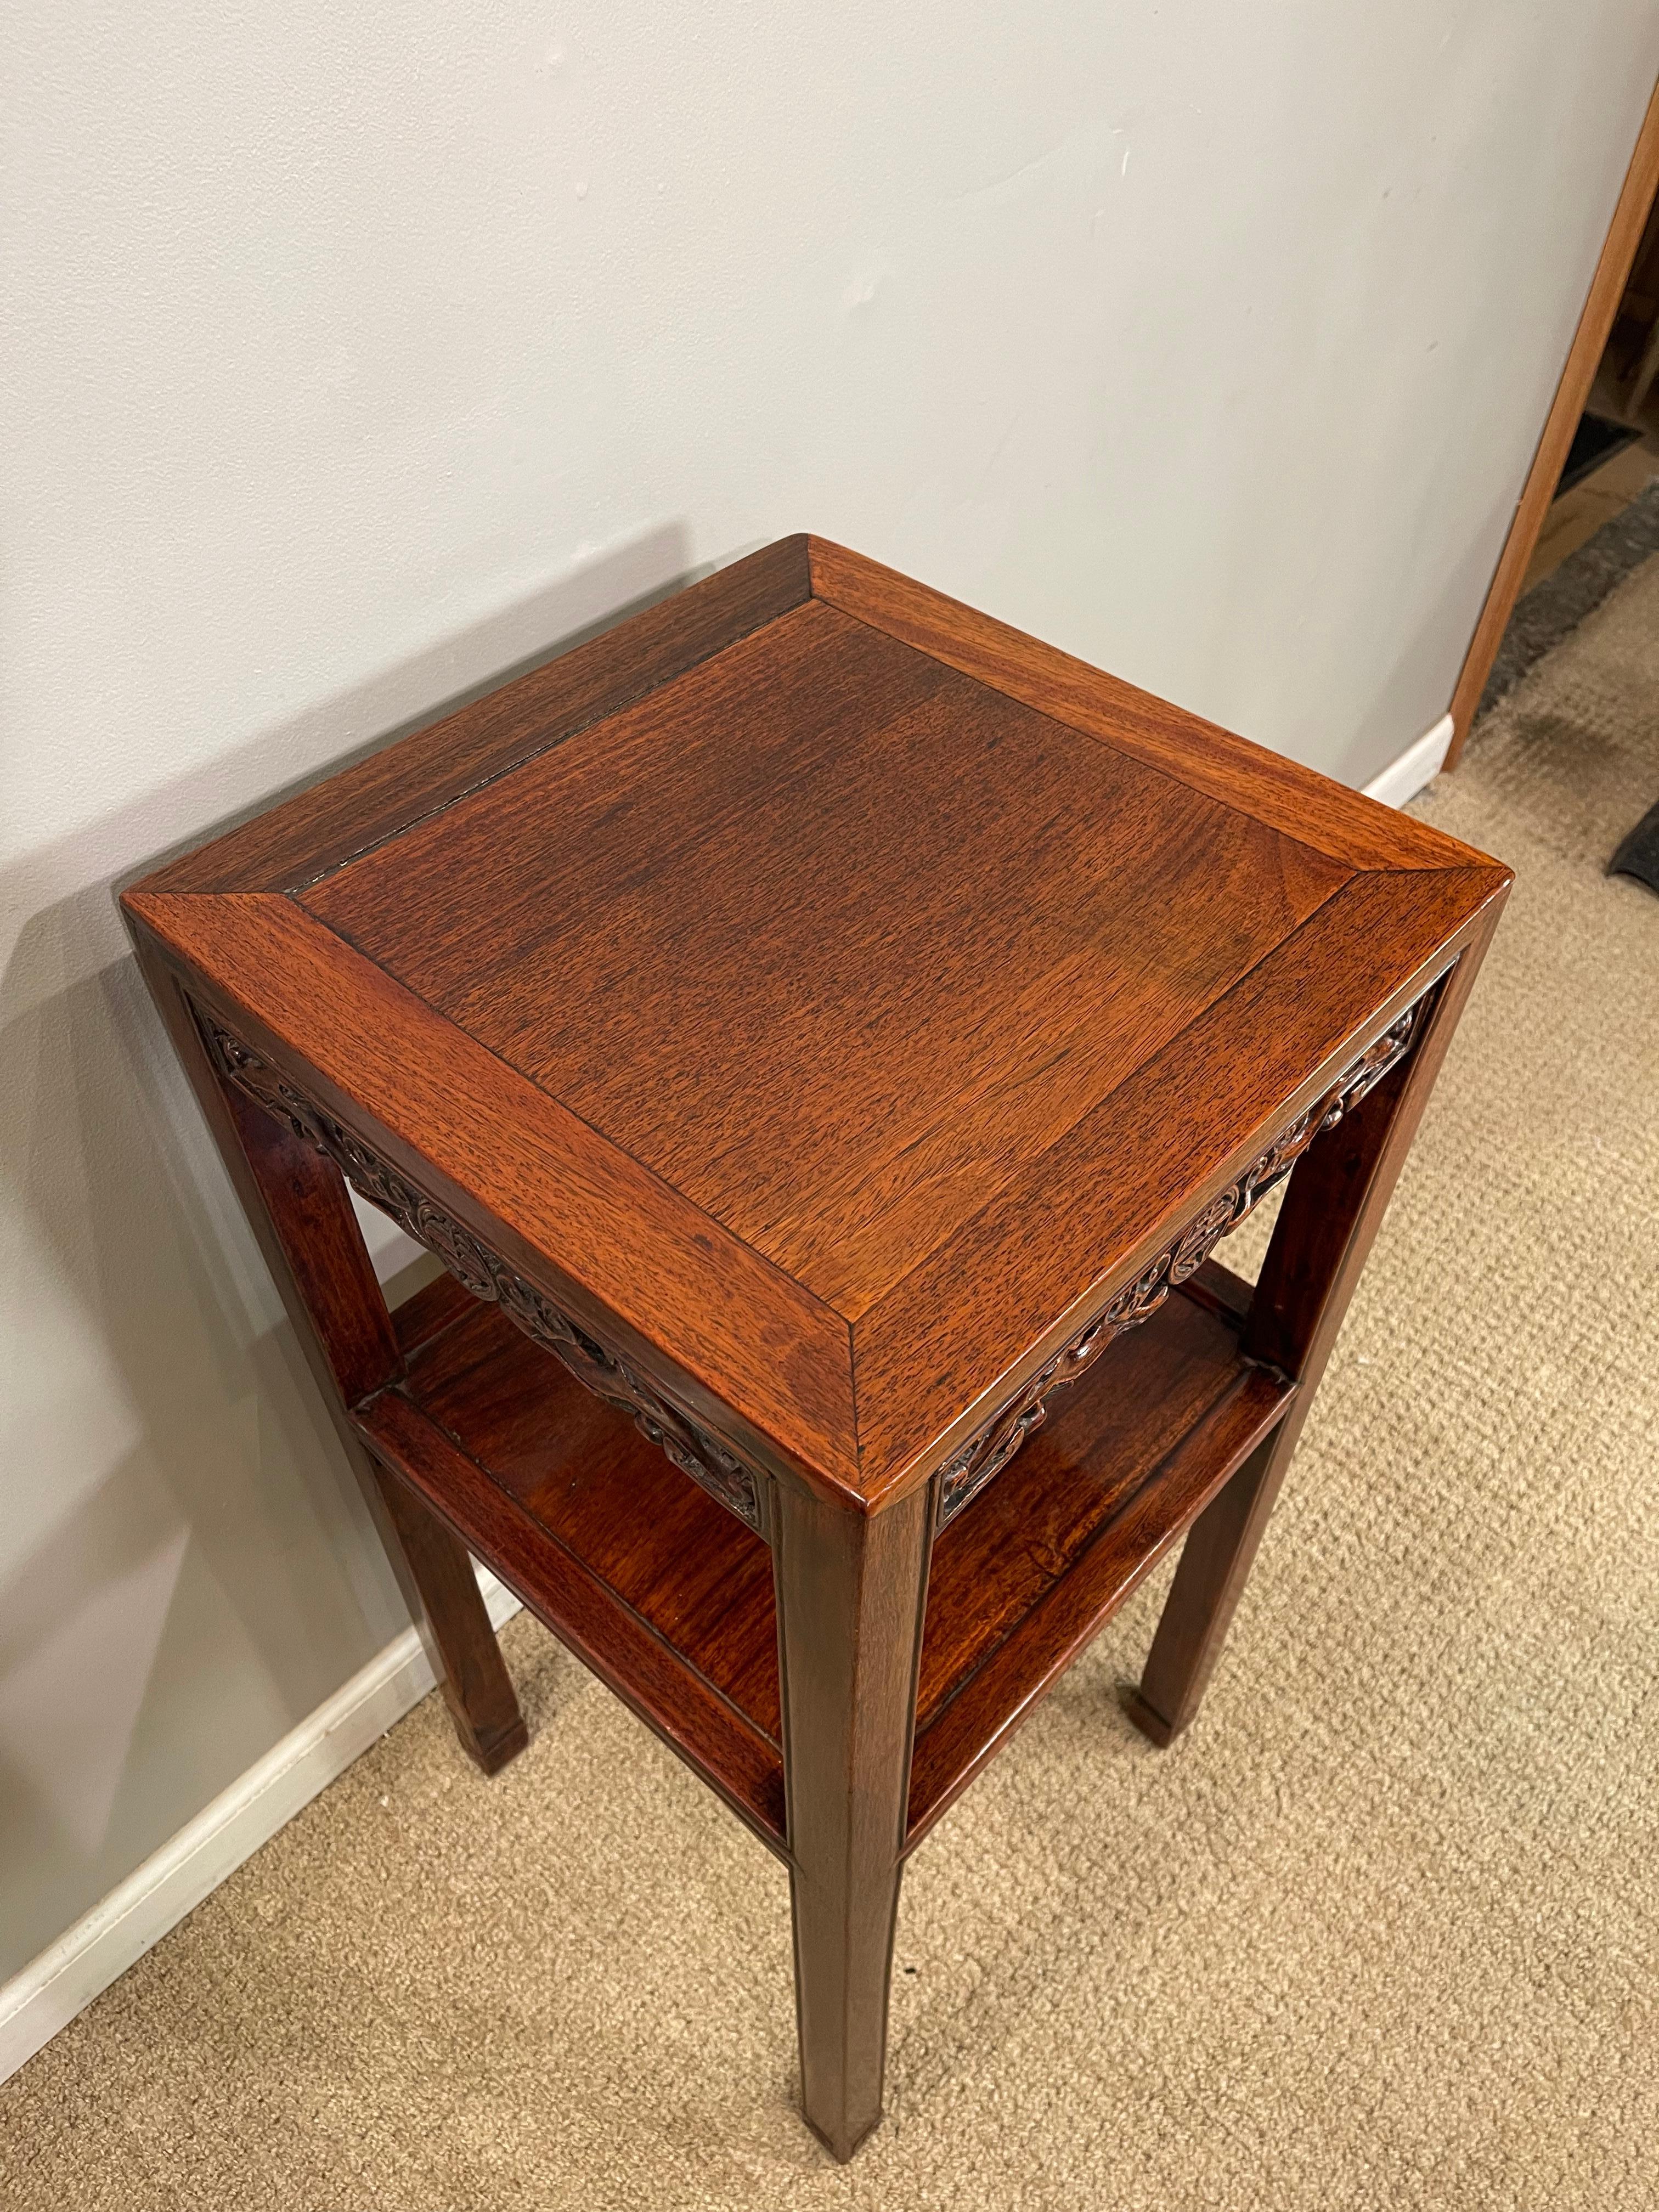 Chinese Hardwood 'Hungmu' Tea Table, Late 19th Century / Early 20th Century For Sale 5